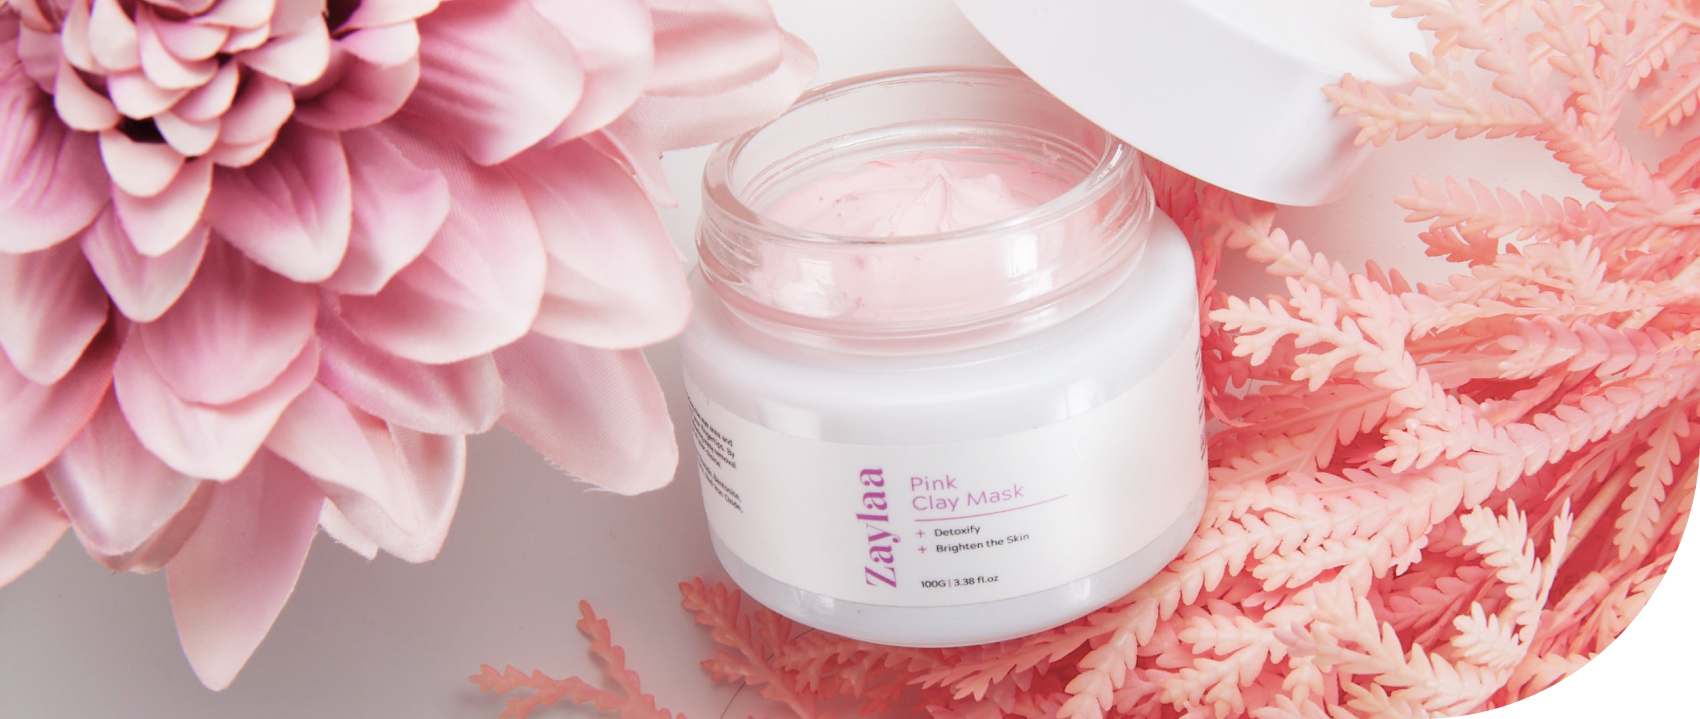 Image of a jar of pink clay mask next to a pink flower